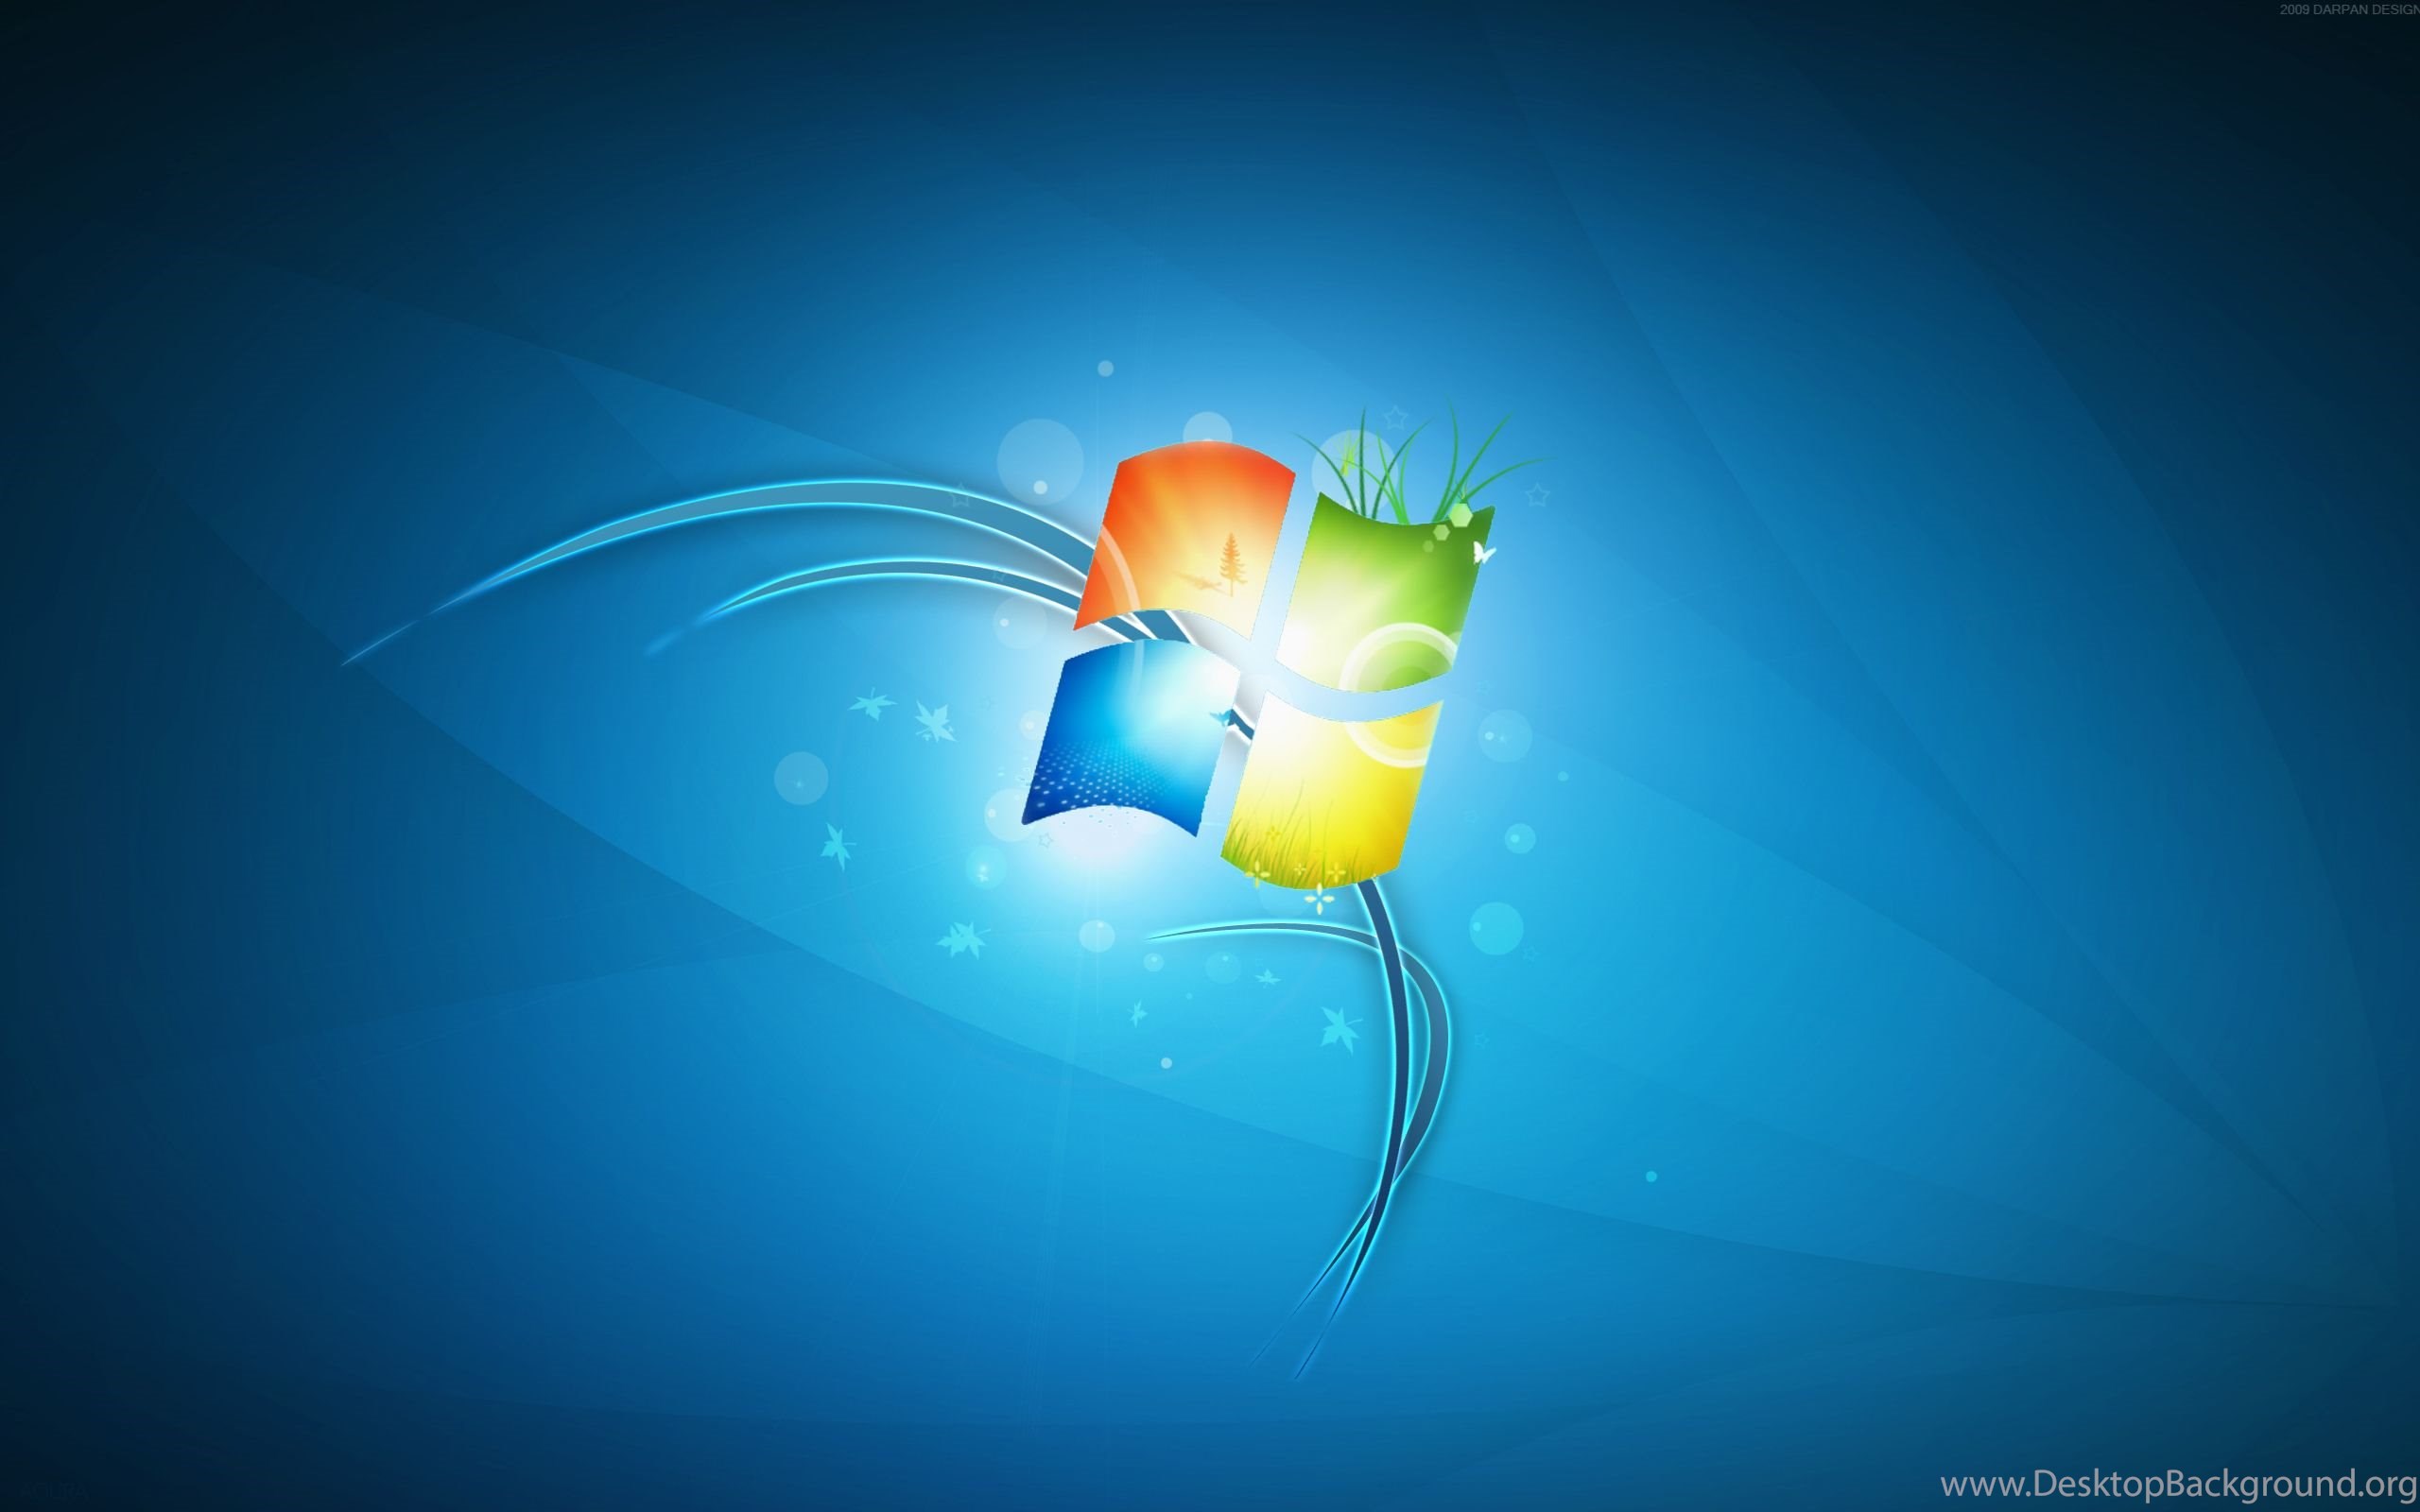 Hd Backgrounds For Windows 7 Wallpapers Cave Desktop Background